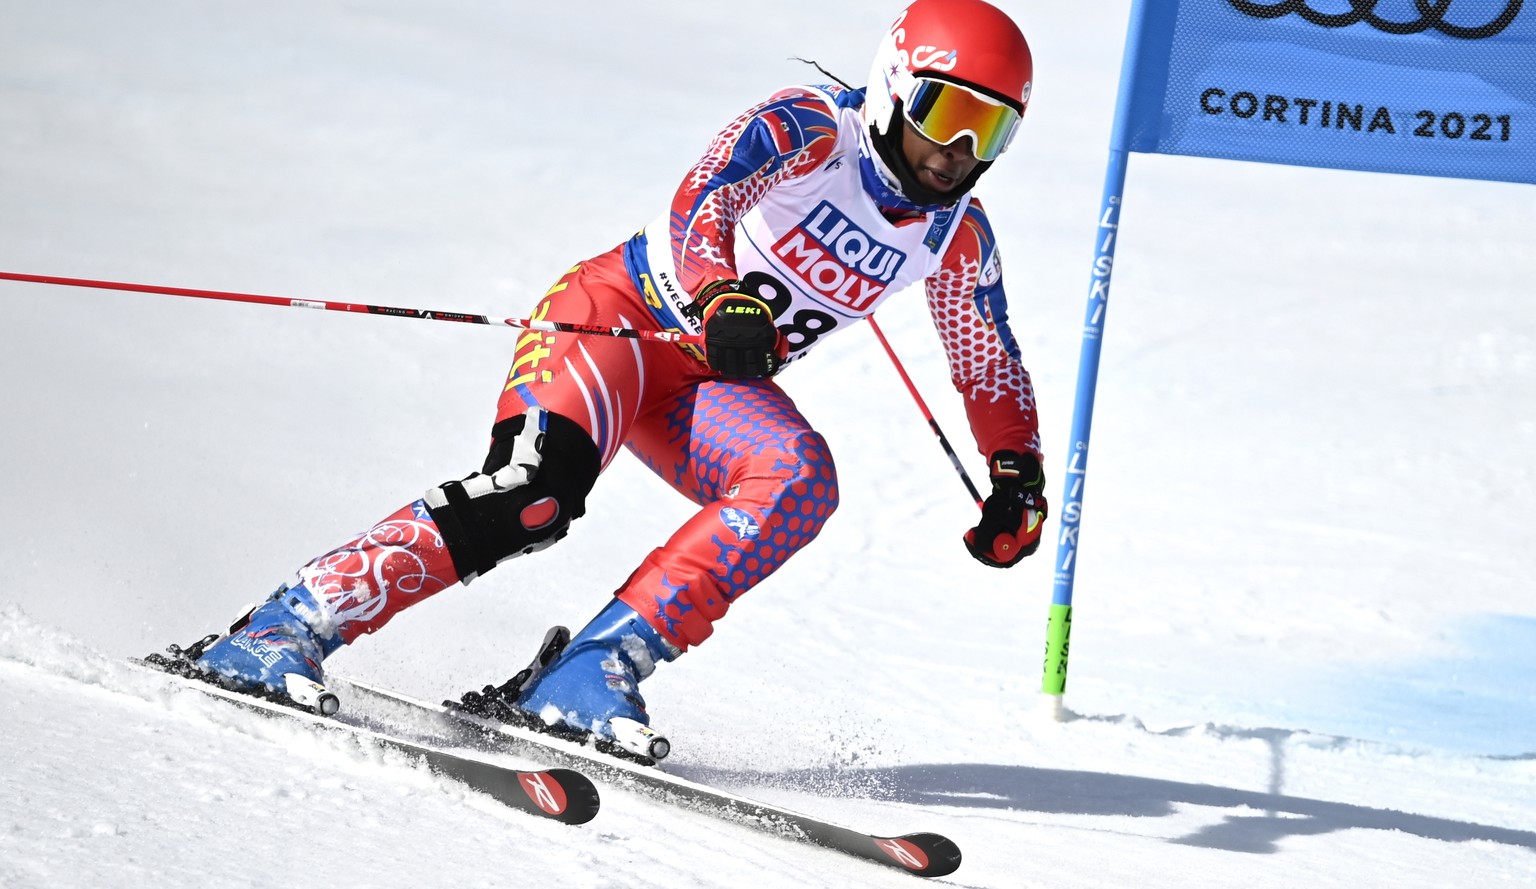 epa09020906 Celine Marti of Haiti cuts a gate during the 1st run of the Women&#039;s Giant Slalom race at the Alpine Skiing World Championships in Cortina d&#039;Ampezzo, Italy, 18 February 2021. EPA/ ...